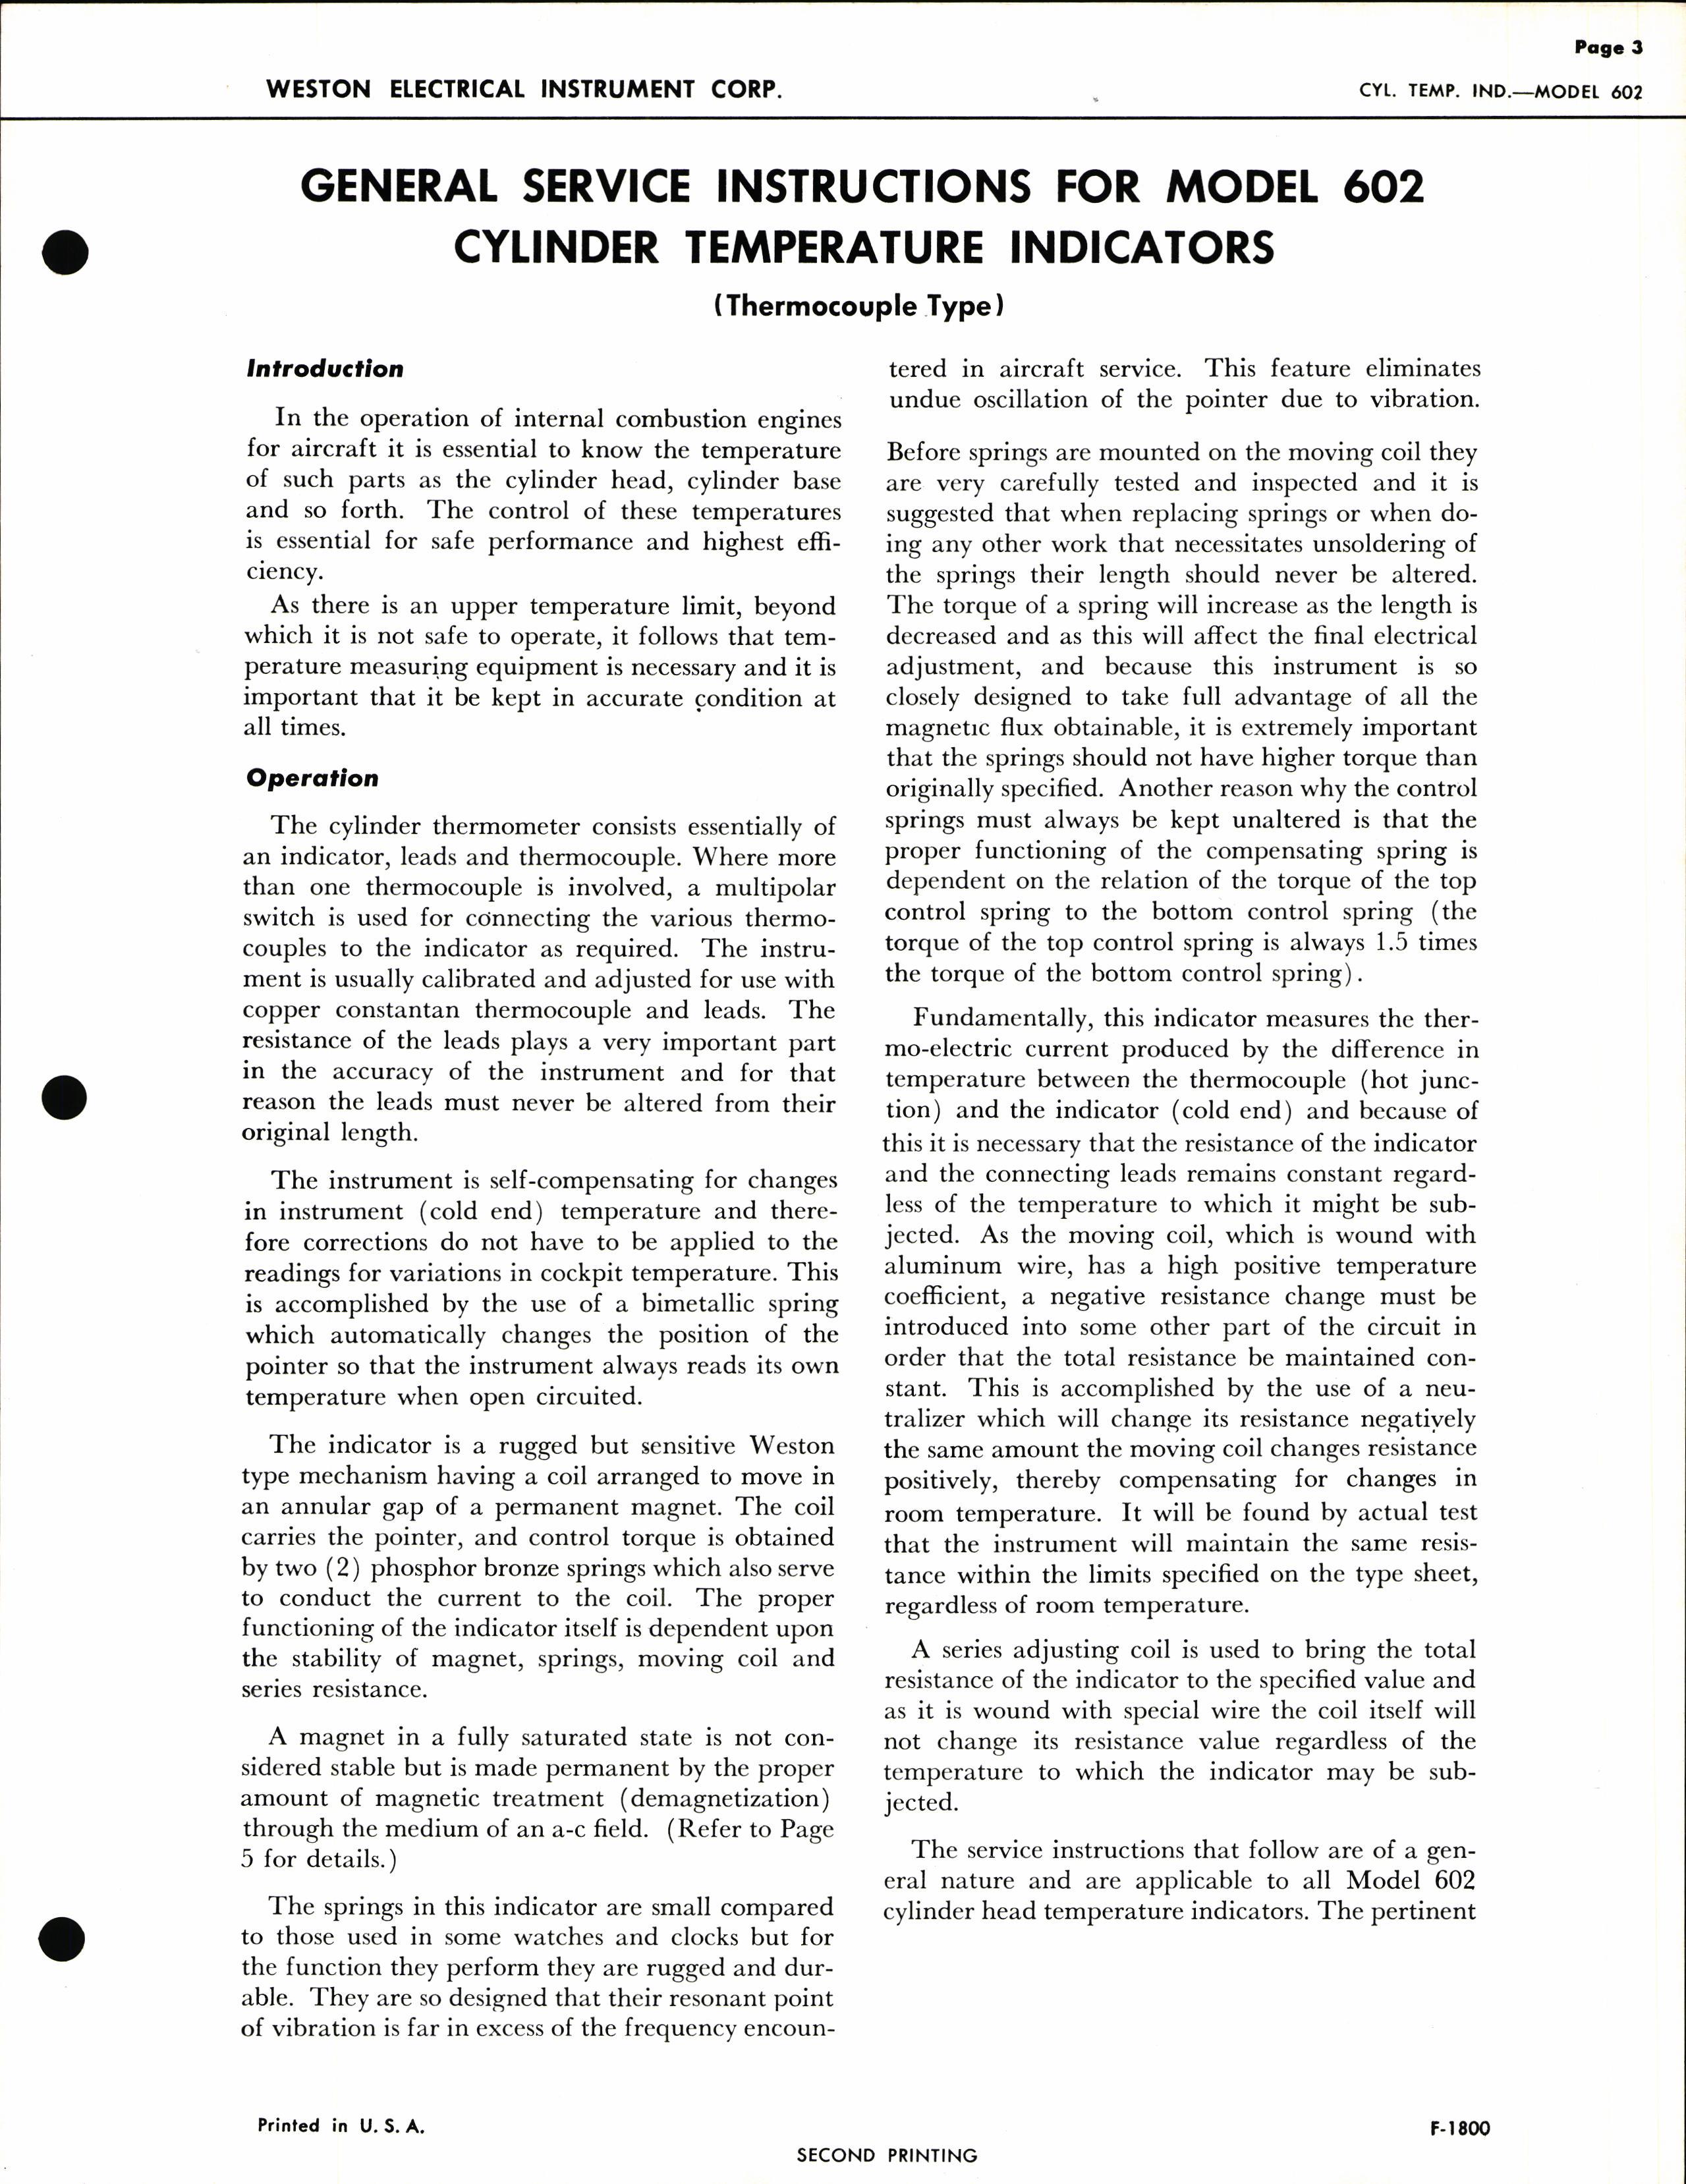 Sample page 3 from AirCorps Library document: Service Instructions for Model 602 Cylinder Temperature Indicators